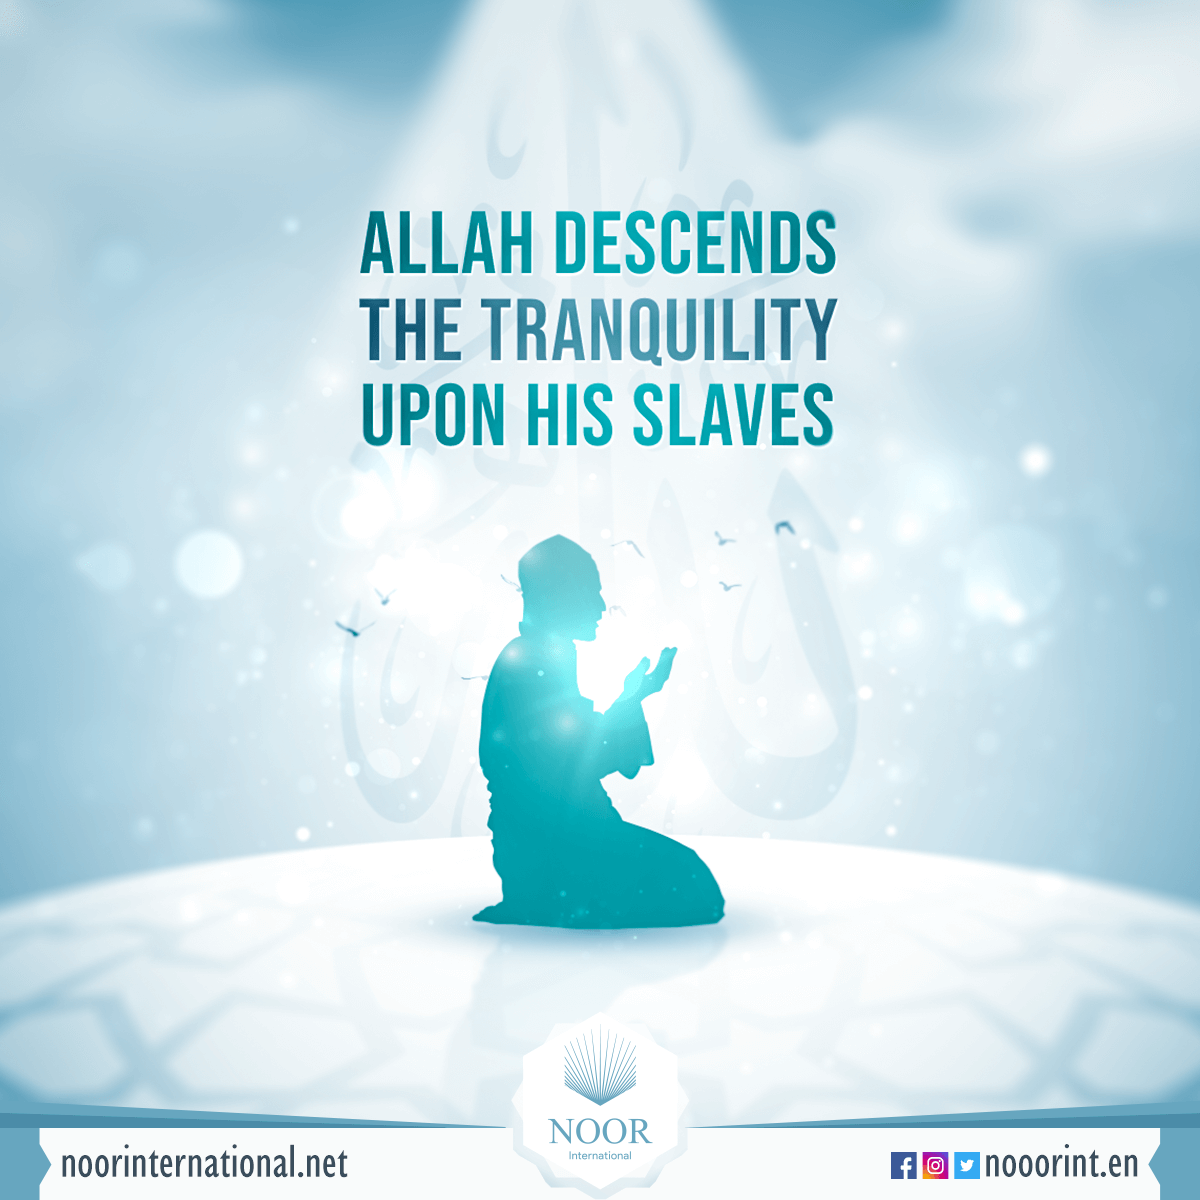 Allah descends the tranquility upon his slaves